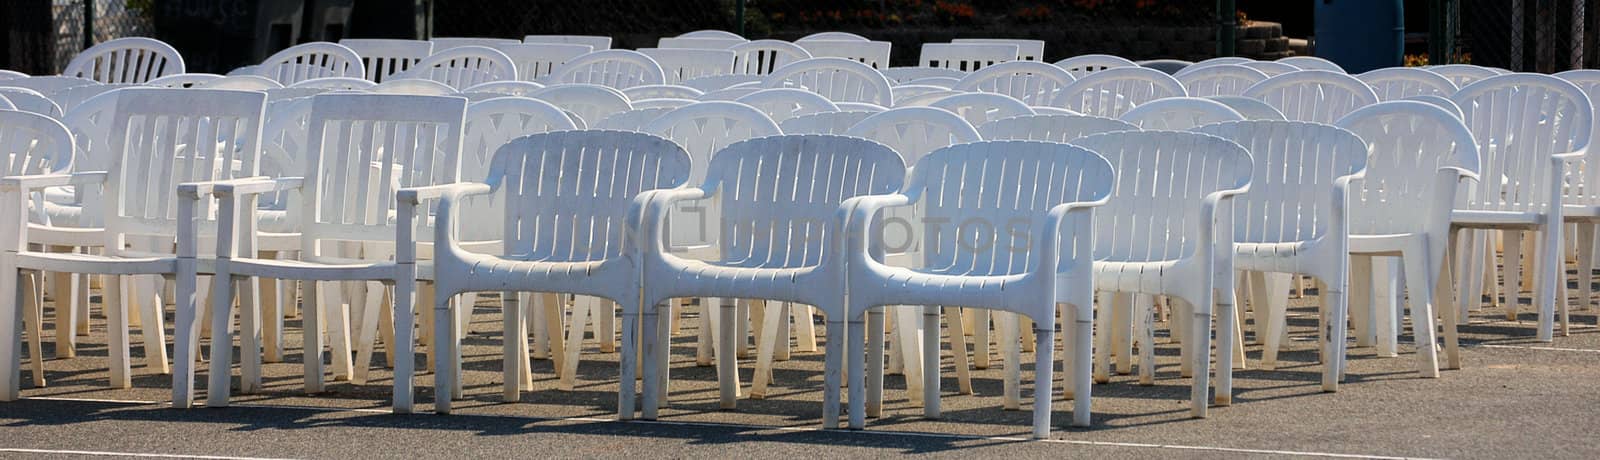 Chairs at a wedding by northwoodsphoto